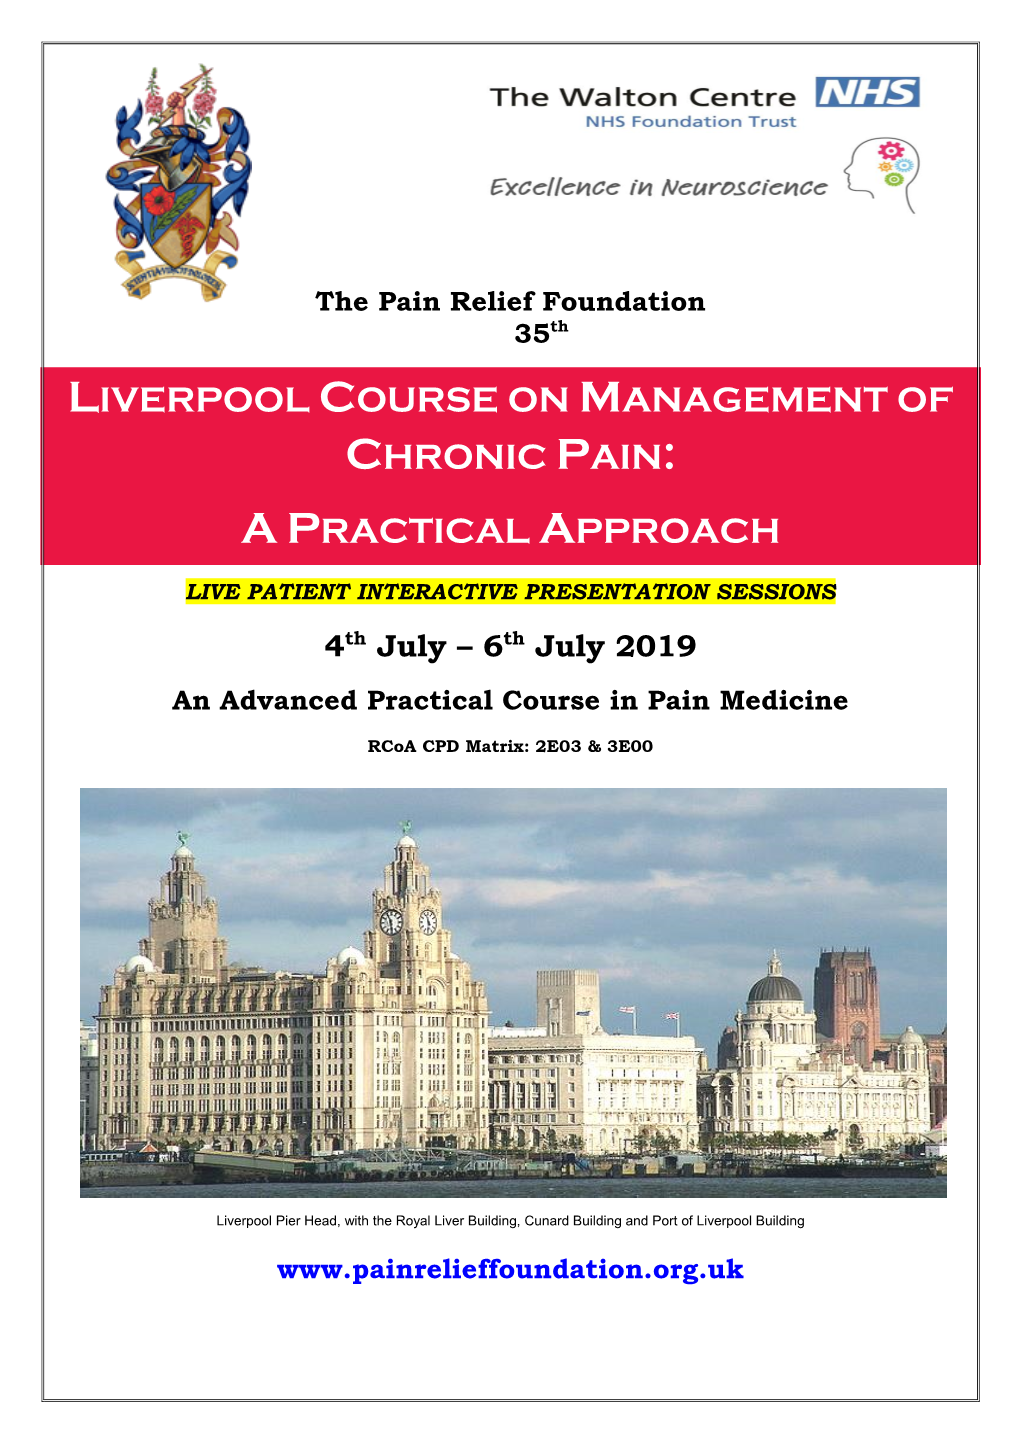 Liverpool Course on Management of Chronic Pain